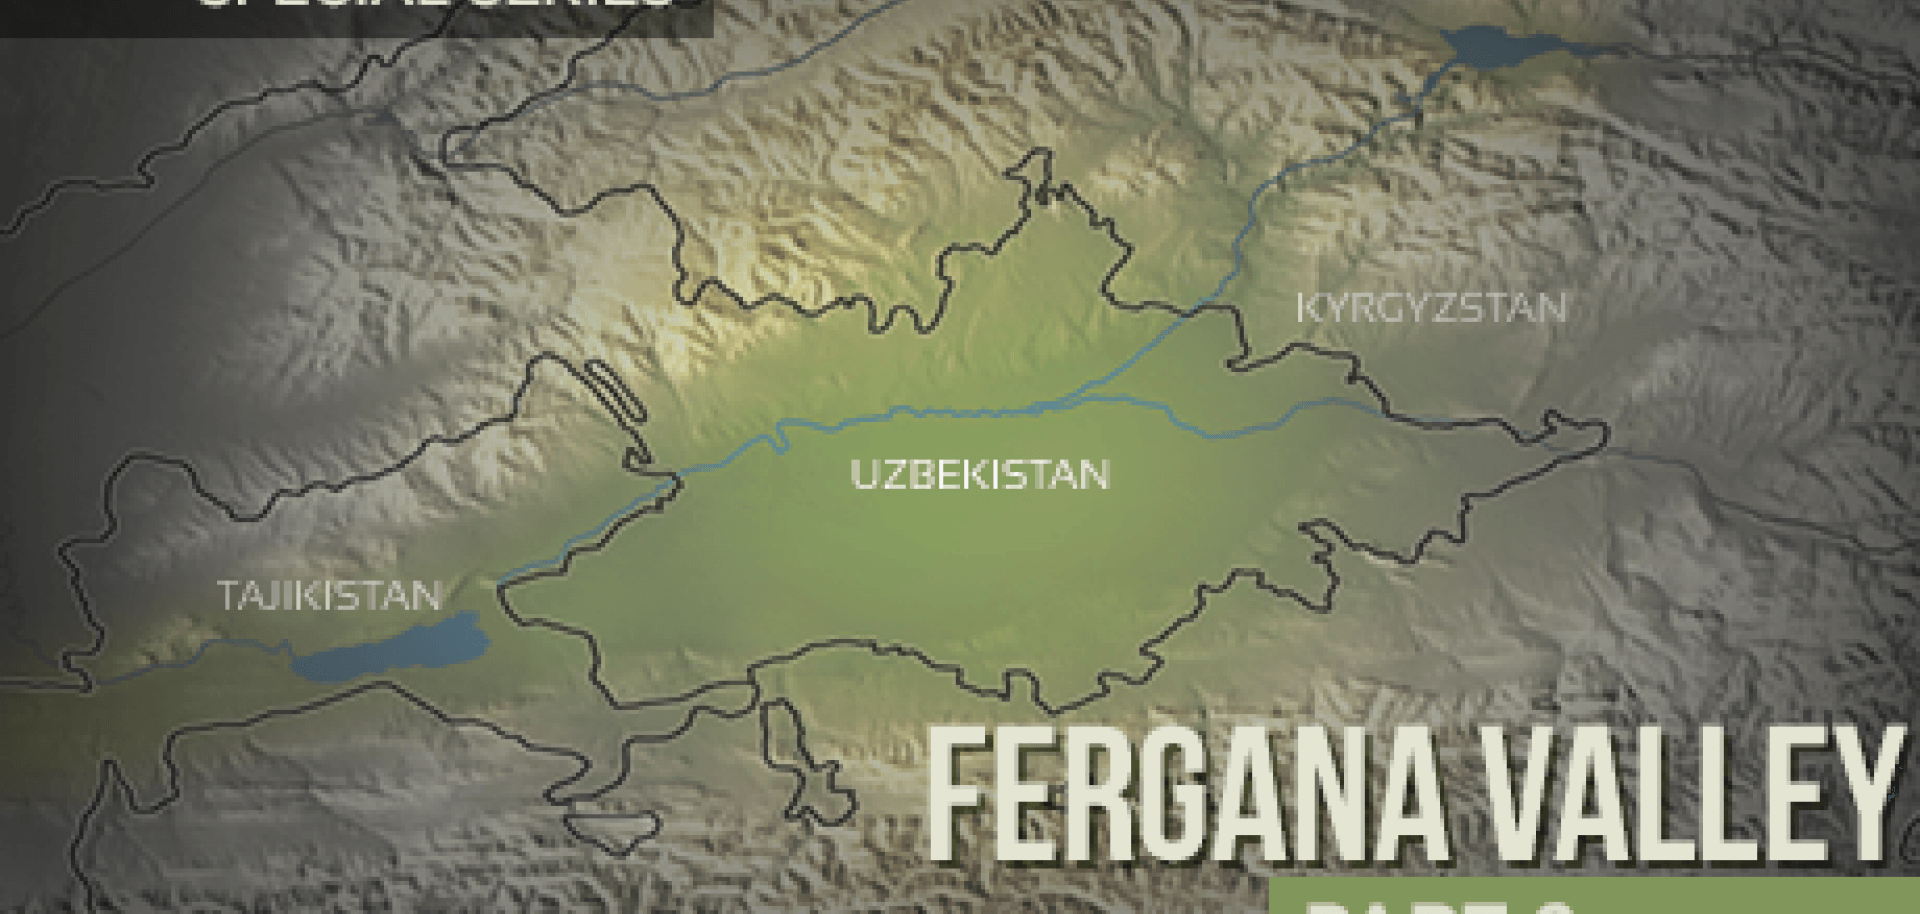 Central Asia: Tensions Grow in the Fergana Valley